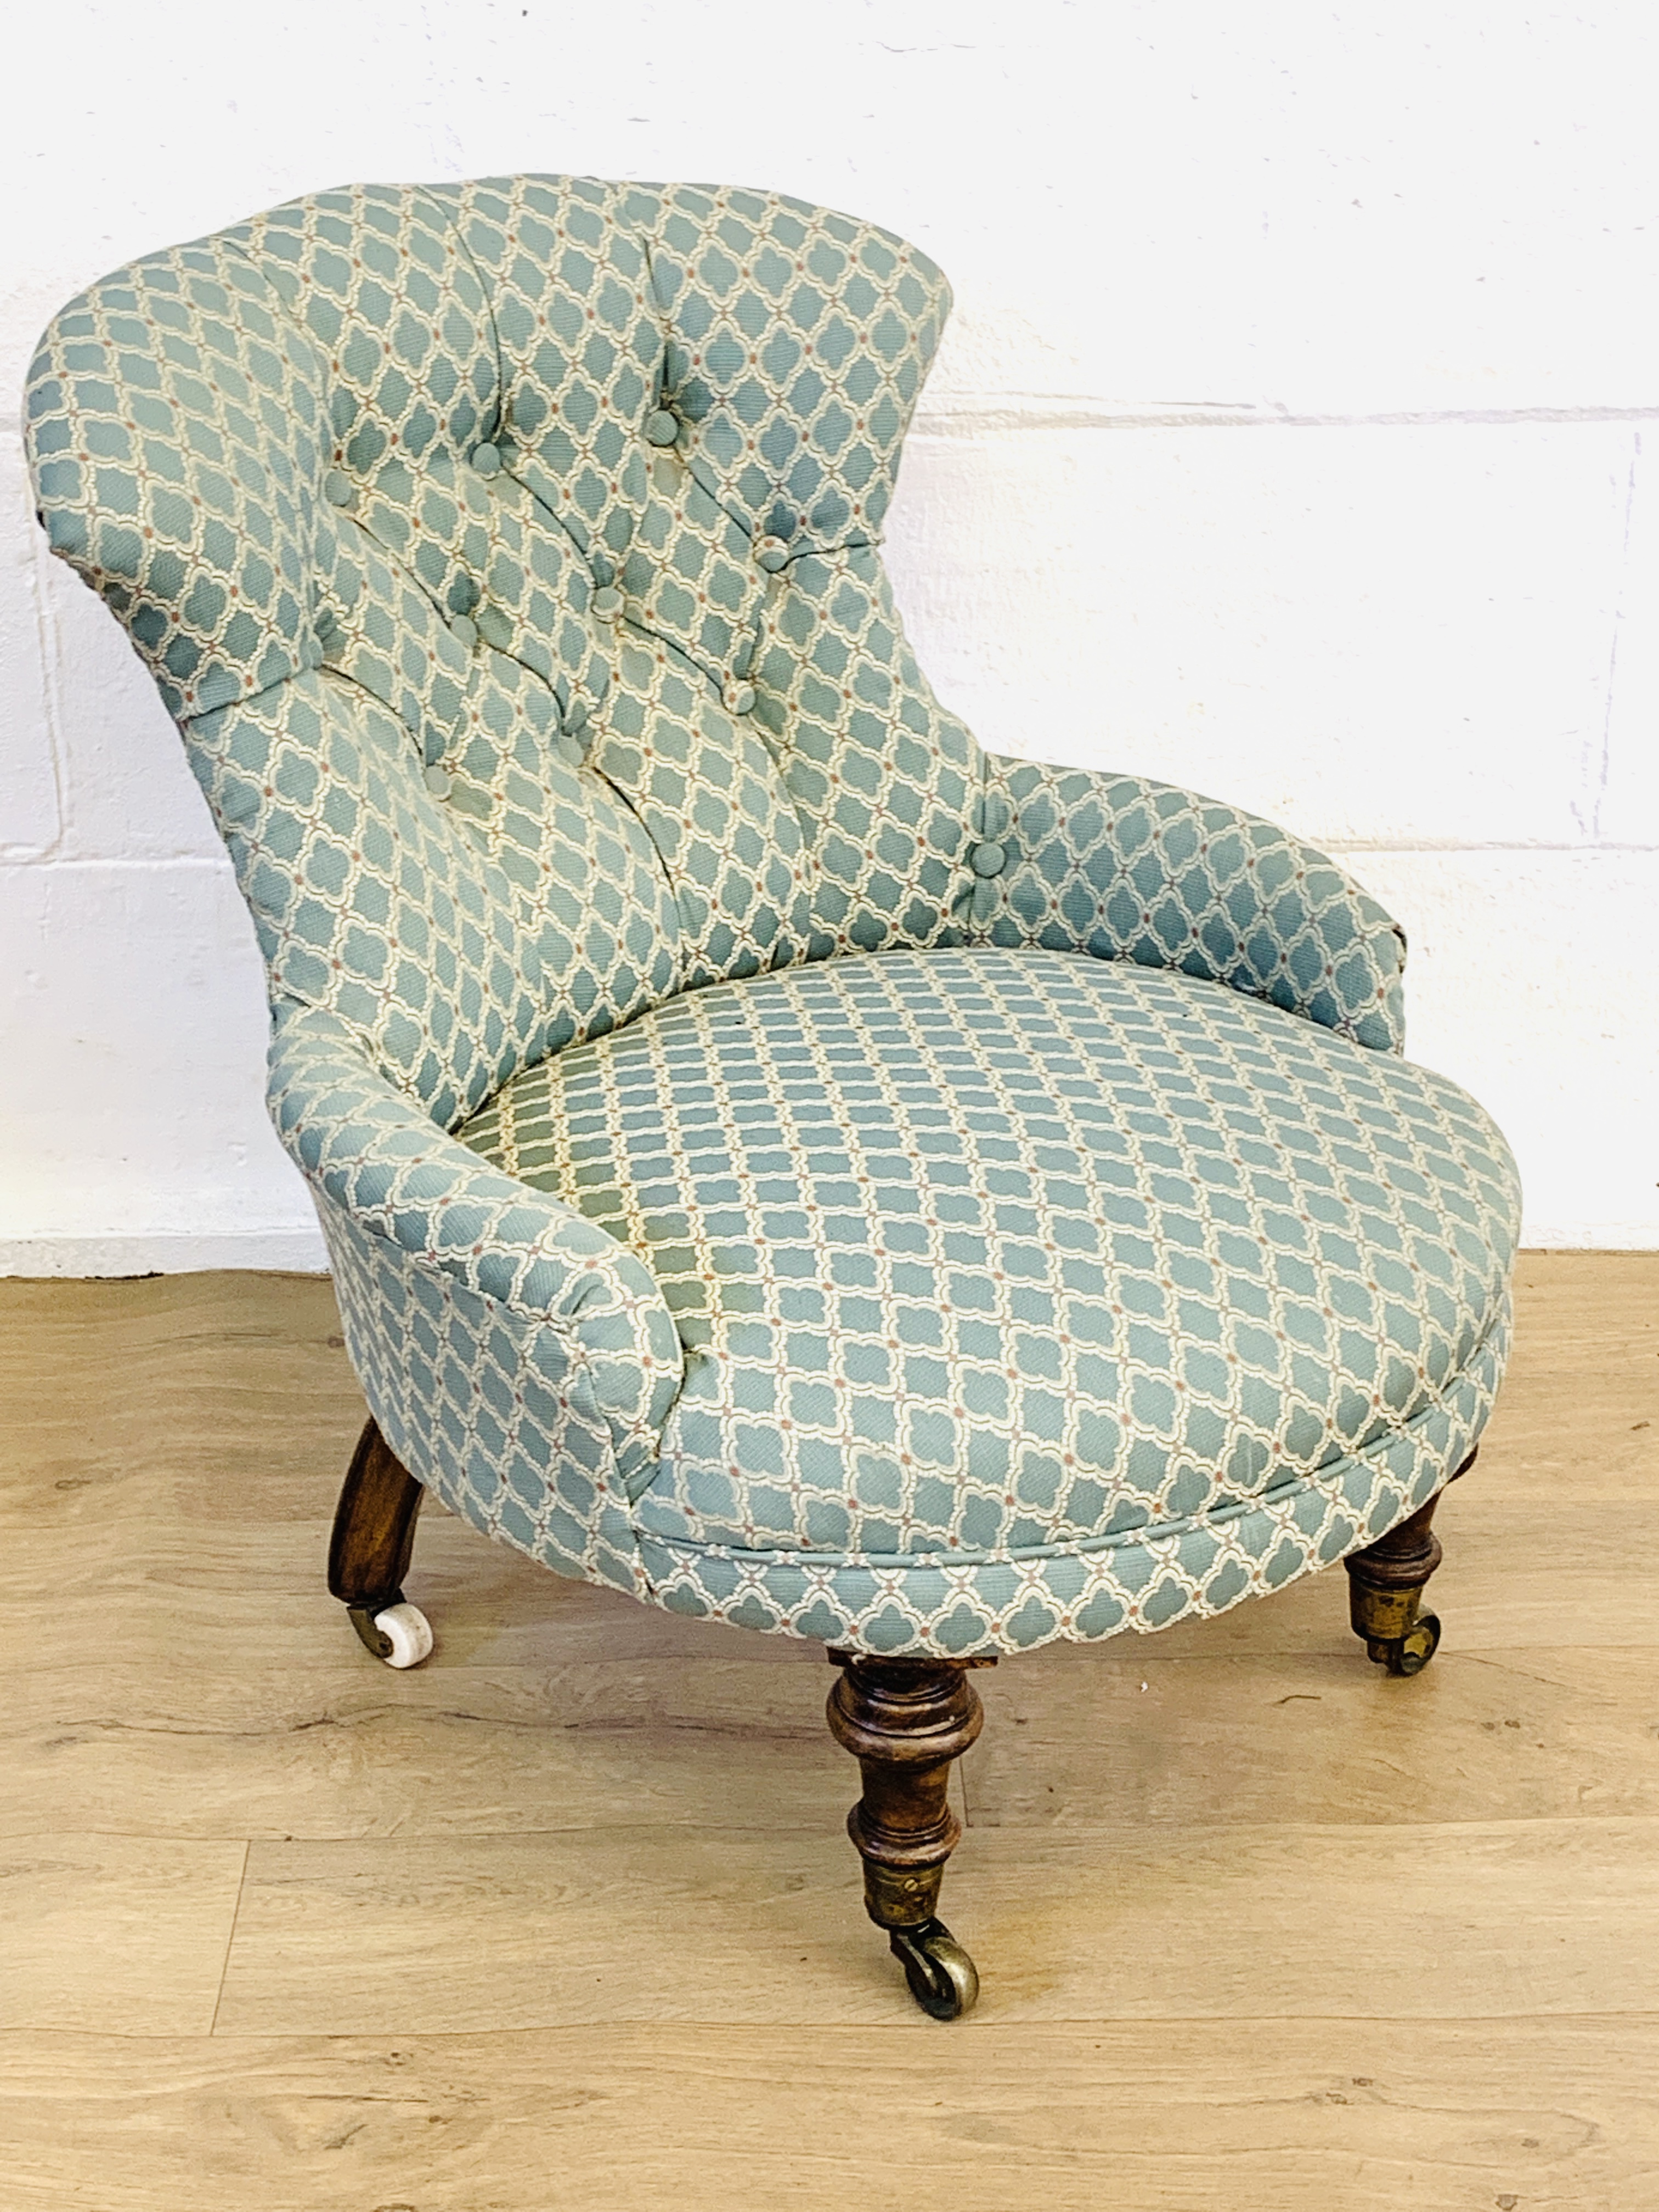 Upholstered button back bedroom chair - Image 5 of 5